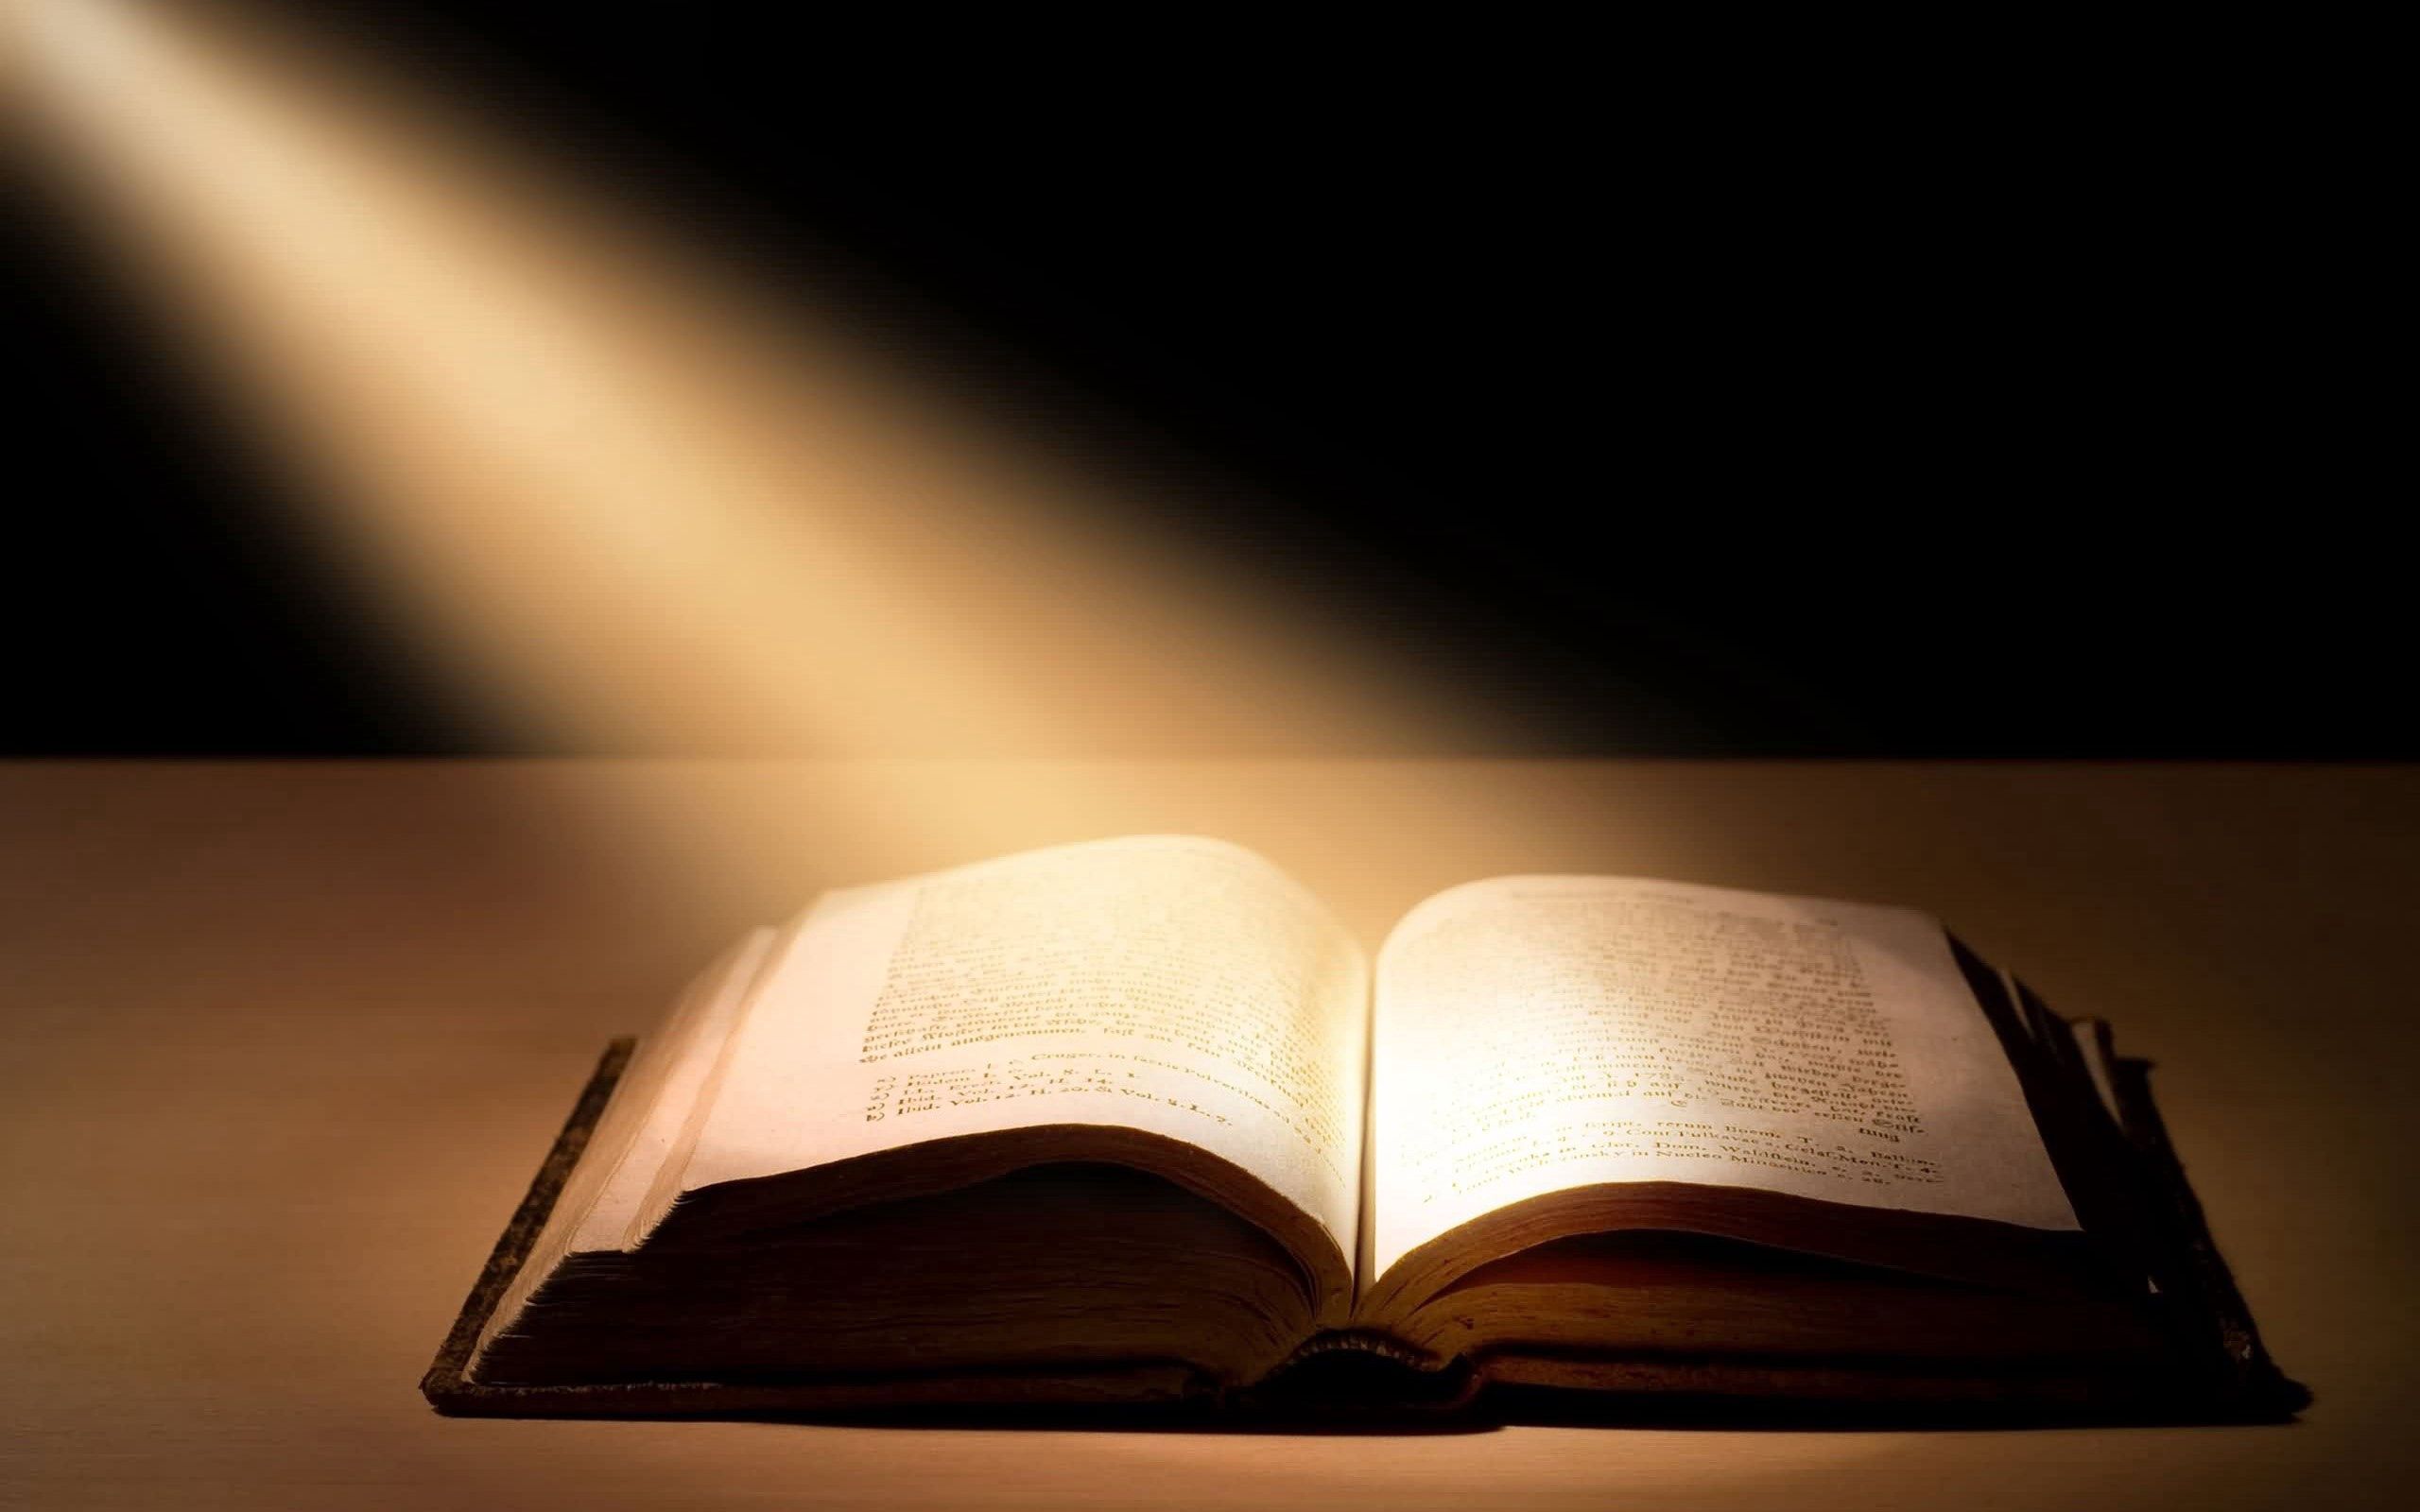 book, table, dark, shine, light, pages, page Full HD